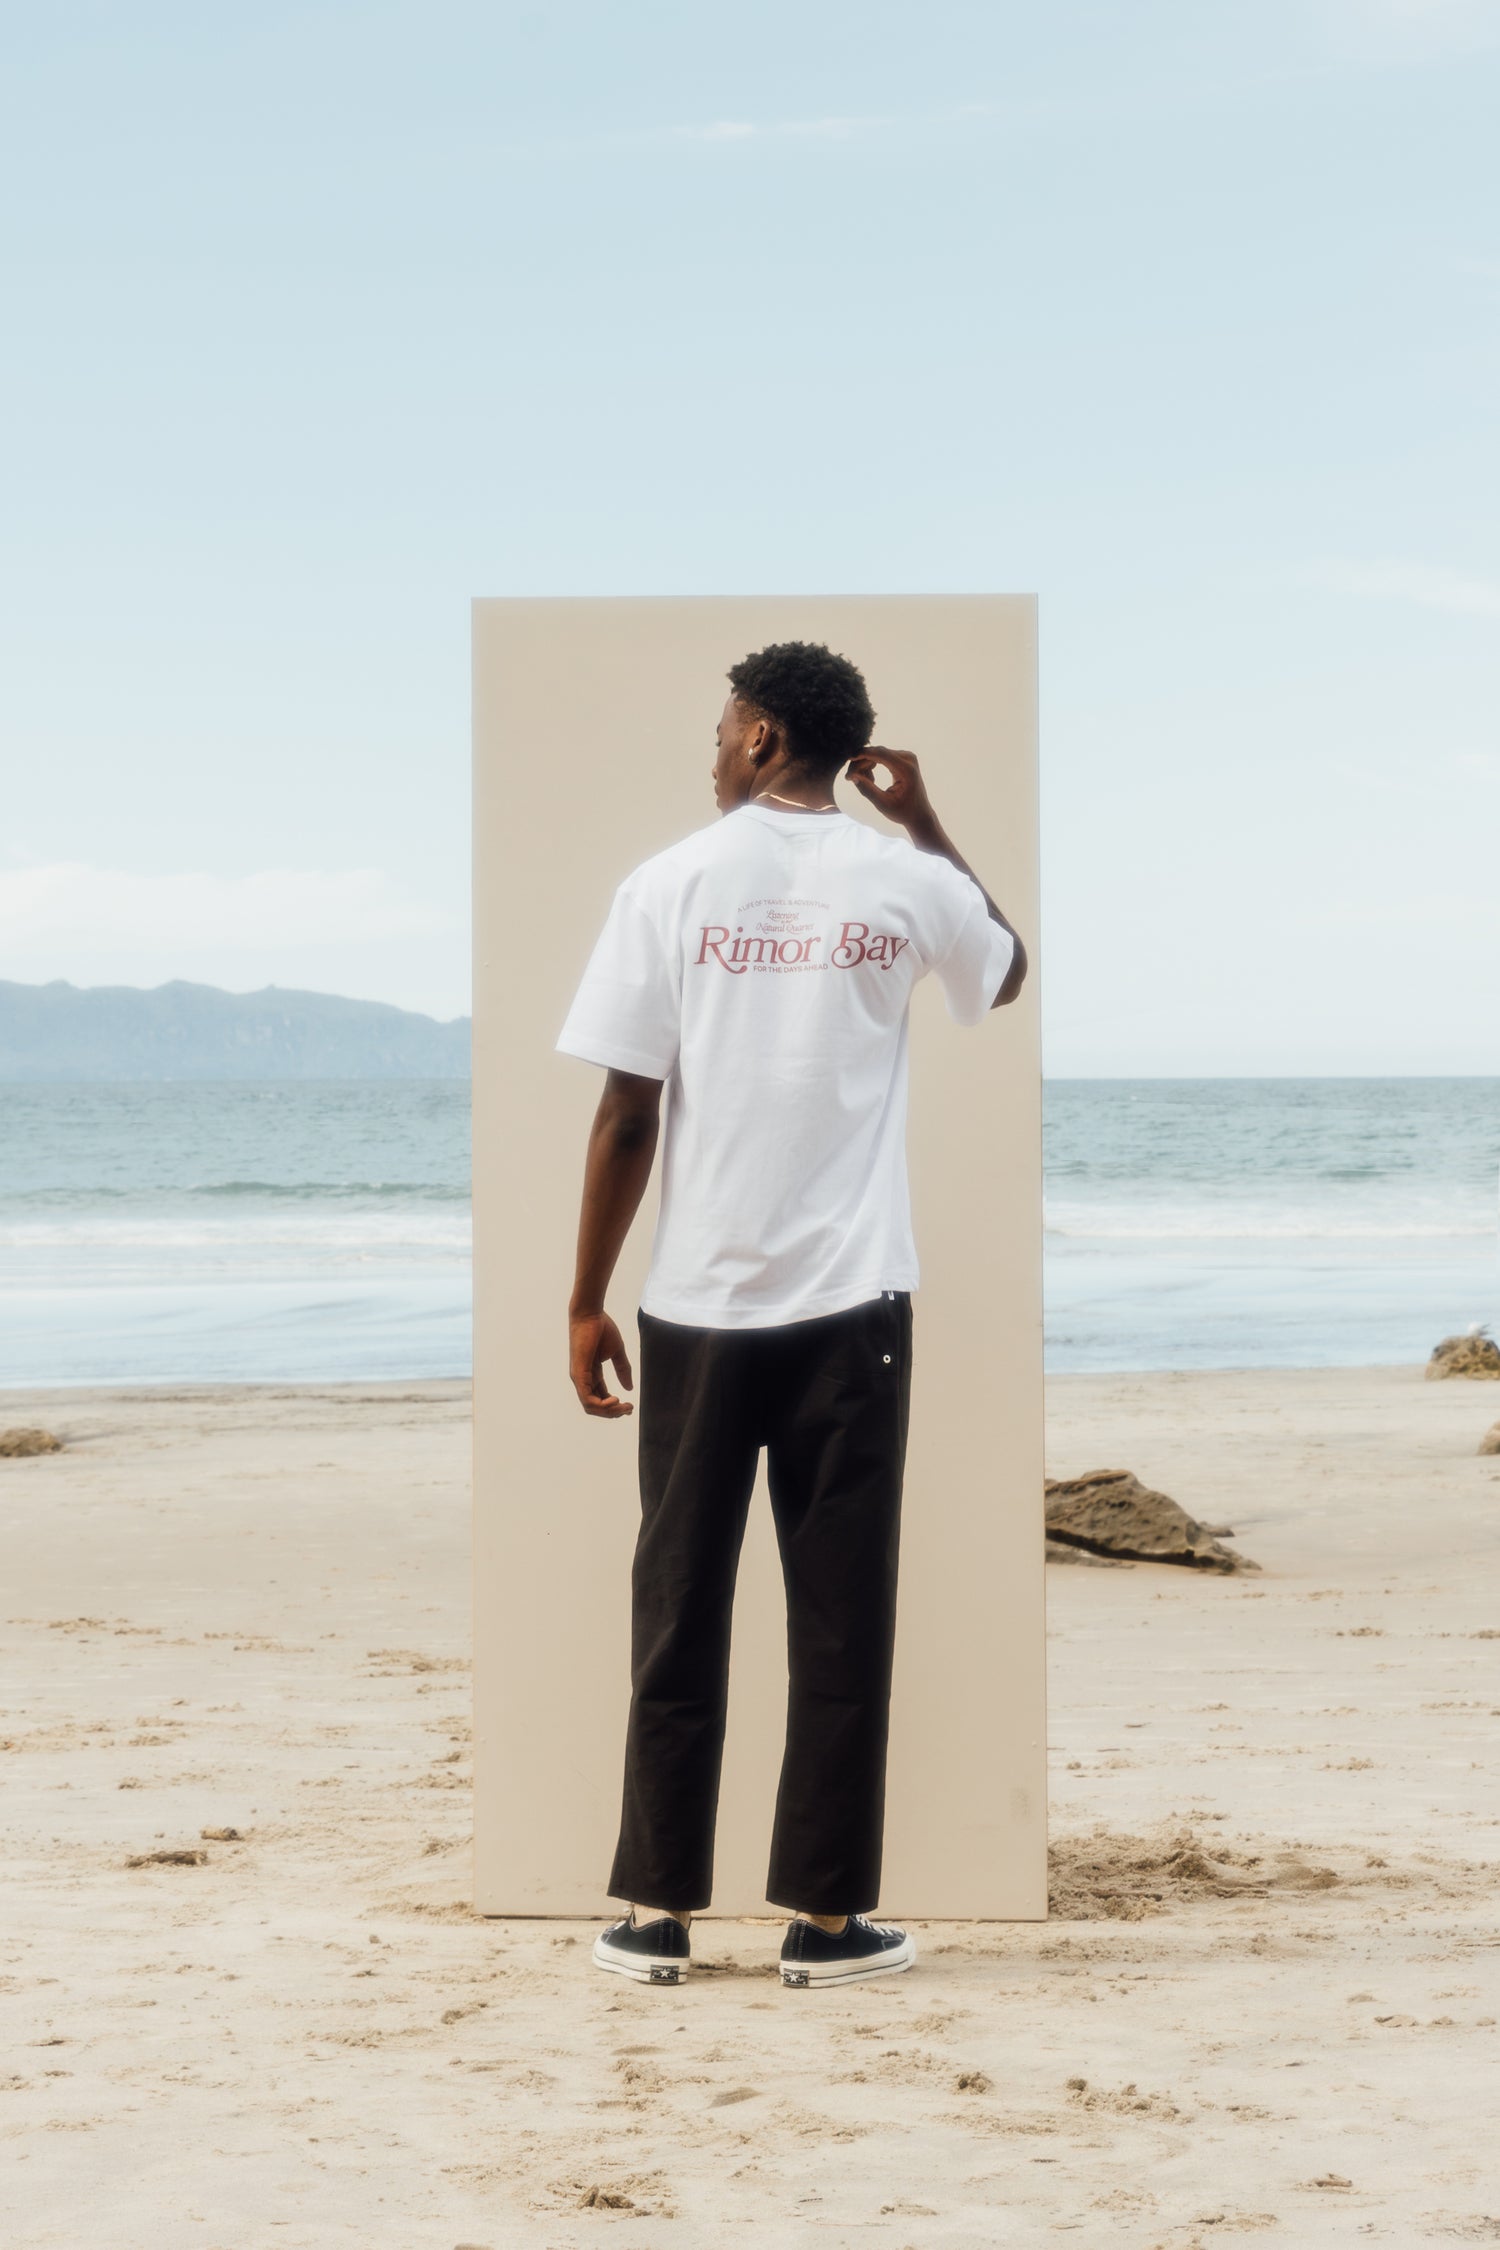 man standing on the beach in front of a beige board wearing white logo tshirt, black pants and chucks.